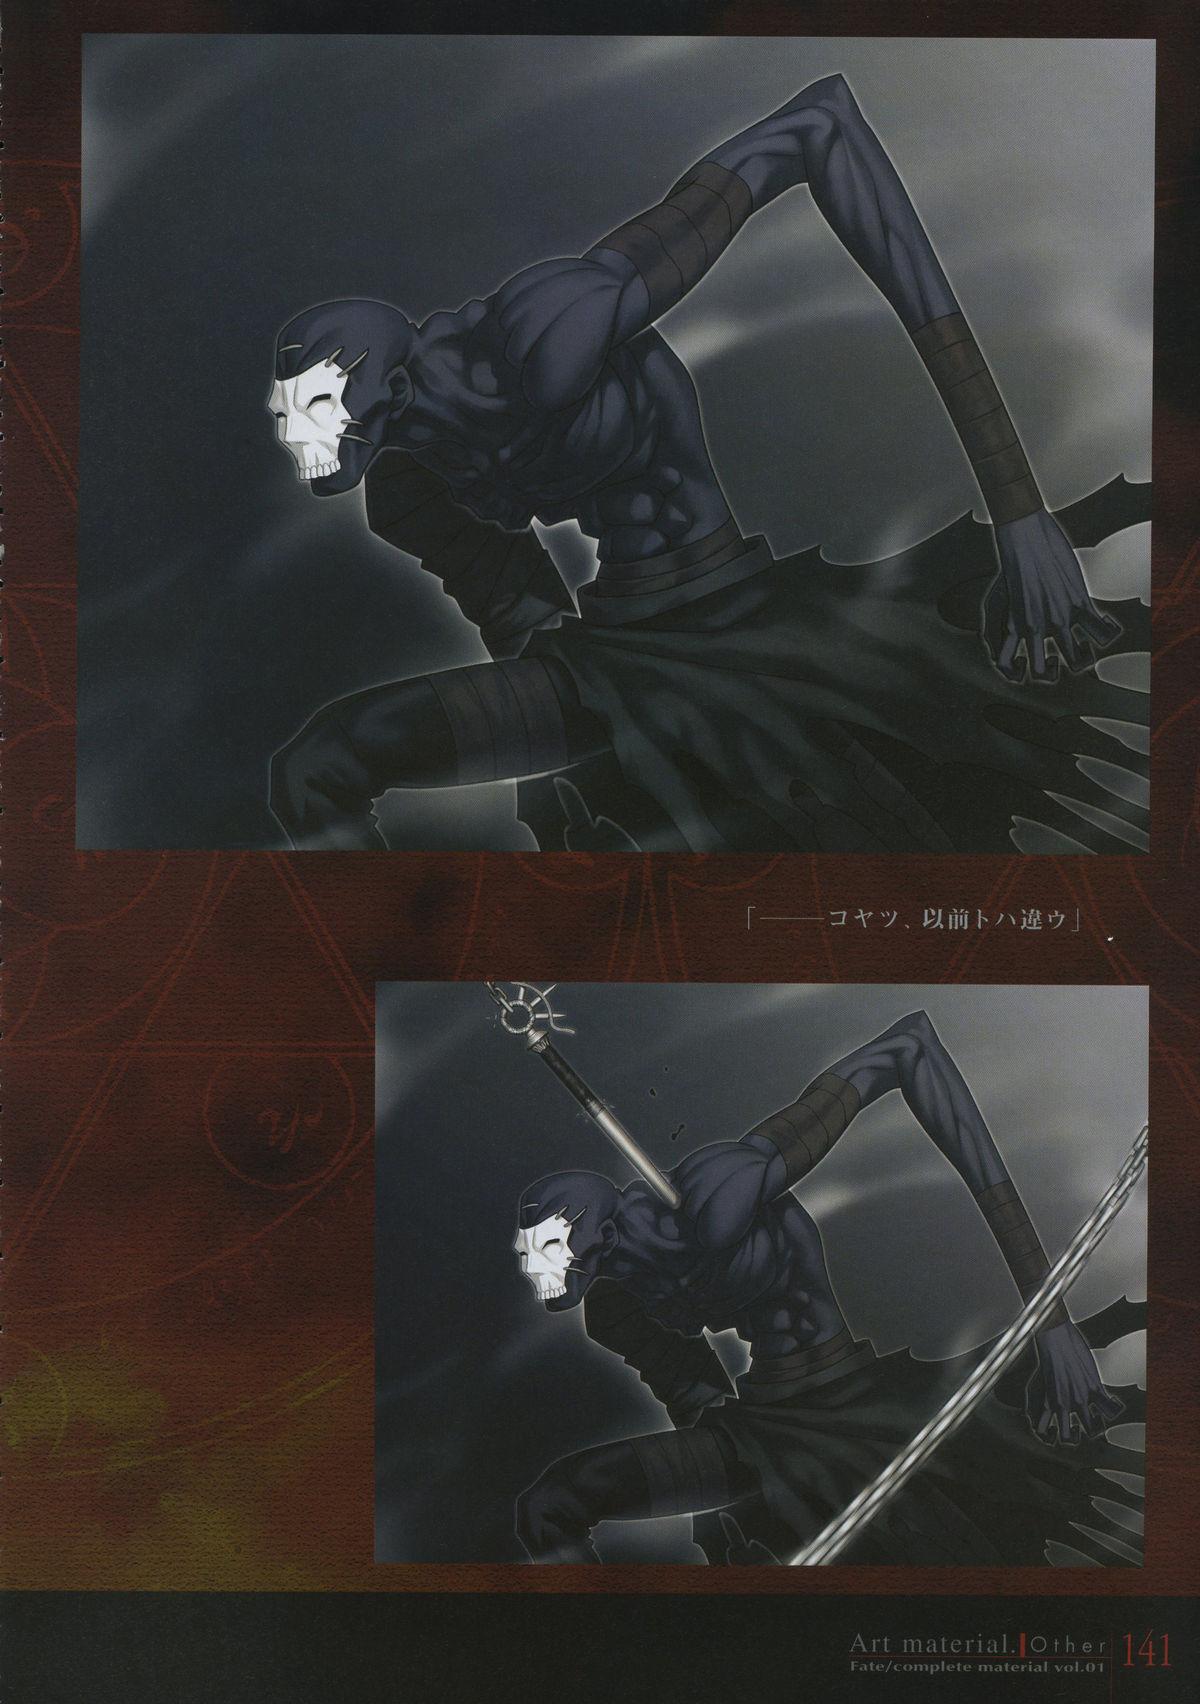 Fate/complete material I - Art material. 145